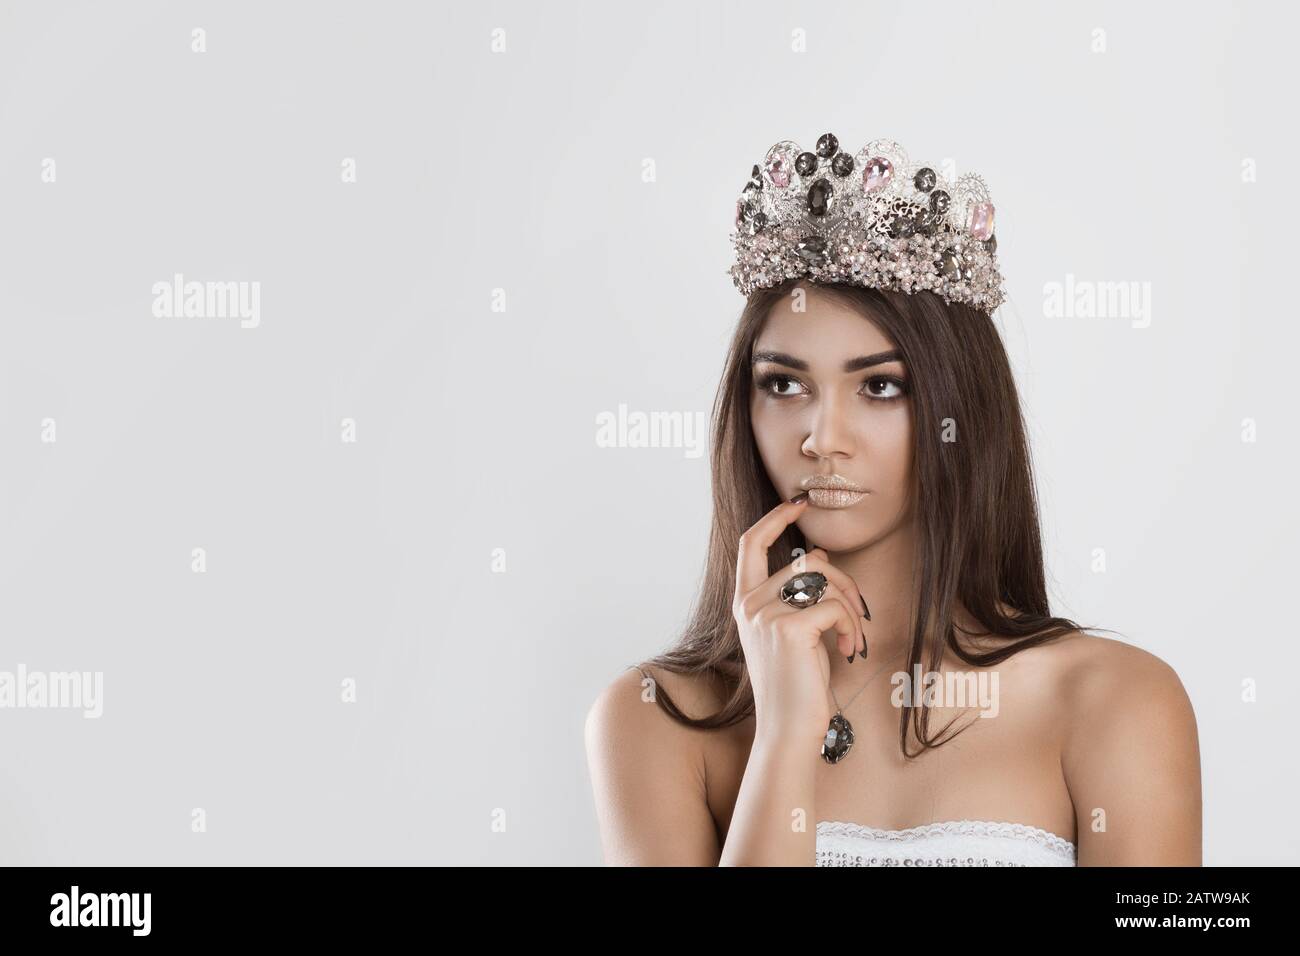 https://c8.alamy.com/comp/2ATW9AK/thinking-about-miss-contest-beauty-crowned-queen-girl-woman-actress-miss-hand-on-chin-face-daydreaming-planning-looking-to-side-isolated-white-wall-f-2ATW9AK.jpg